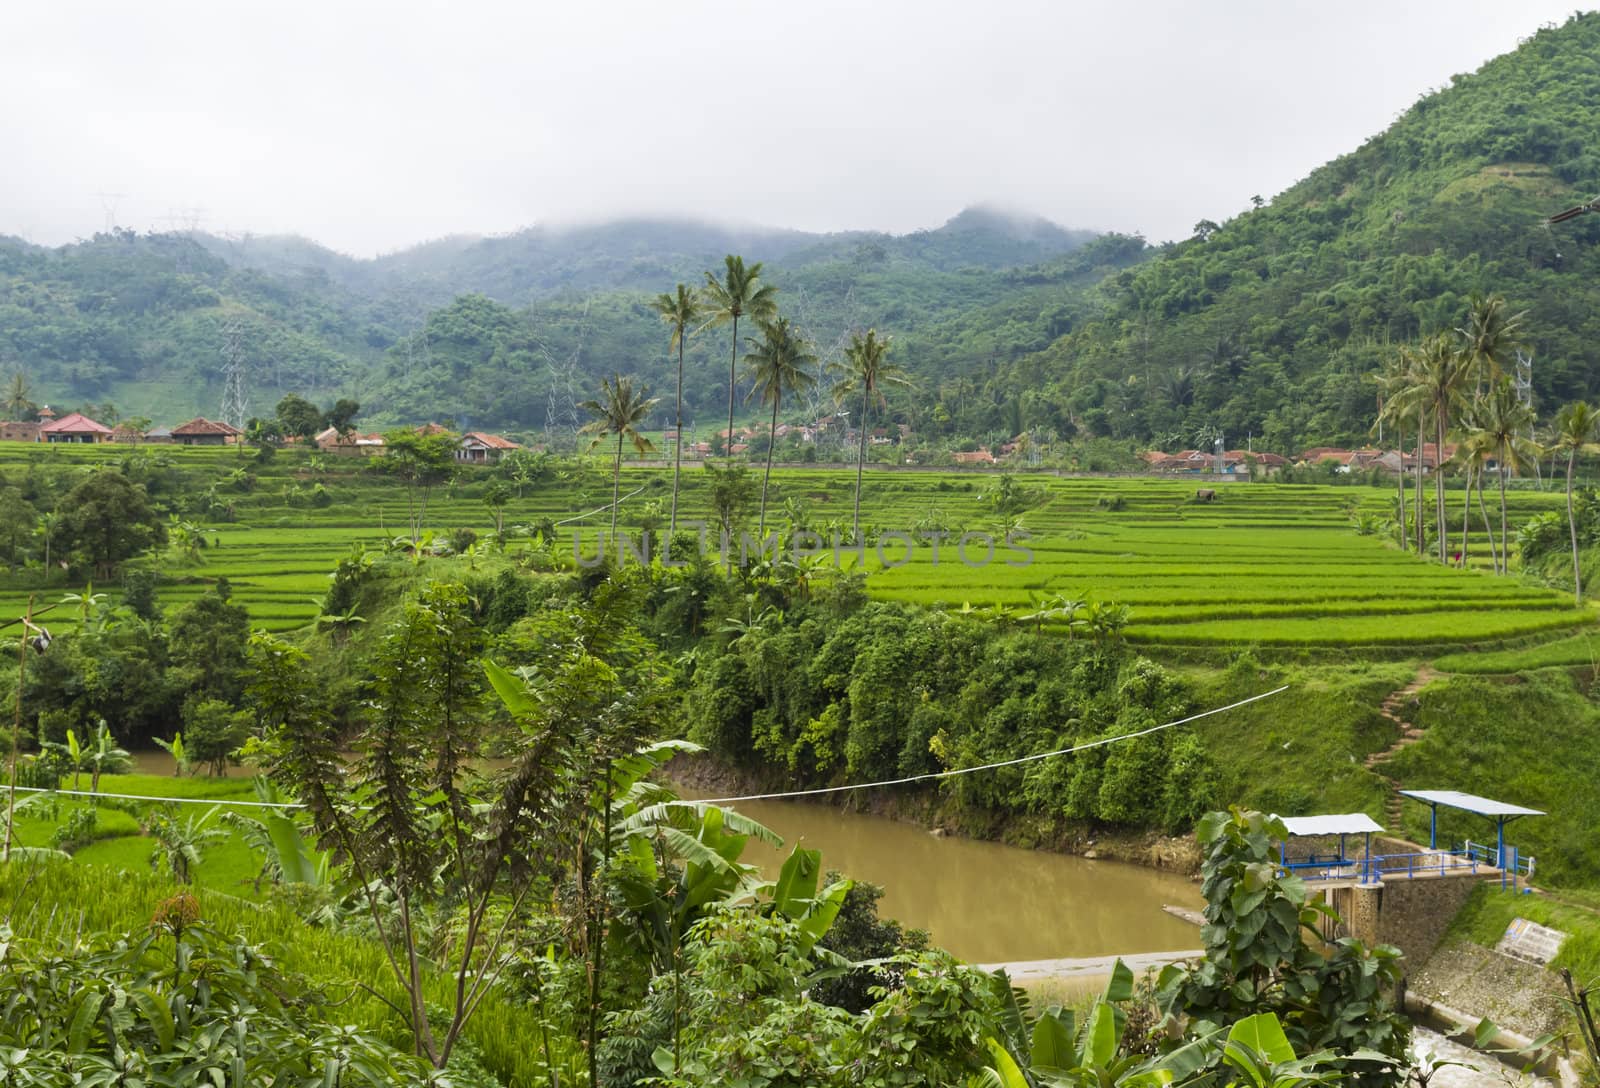 view of paddy field terrace by the mountain side in Bandung, West Jawa